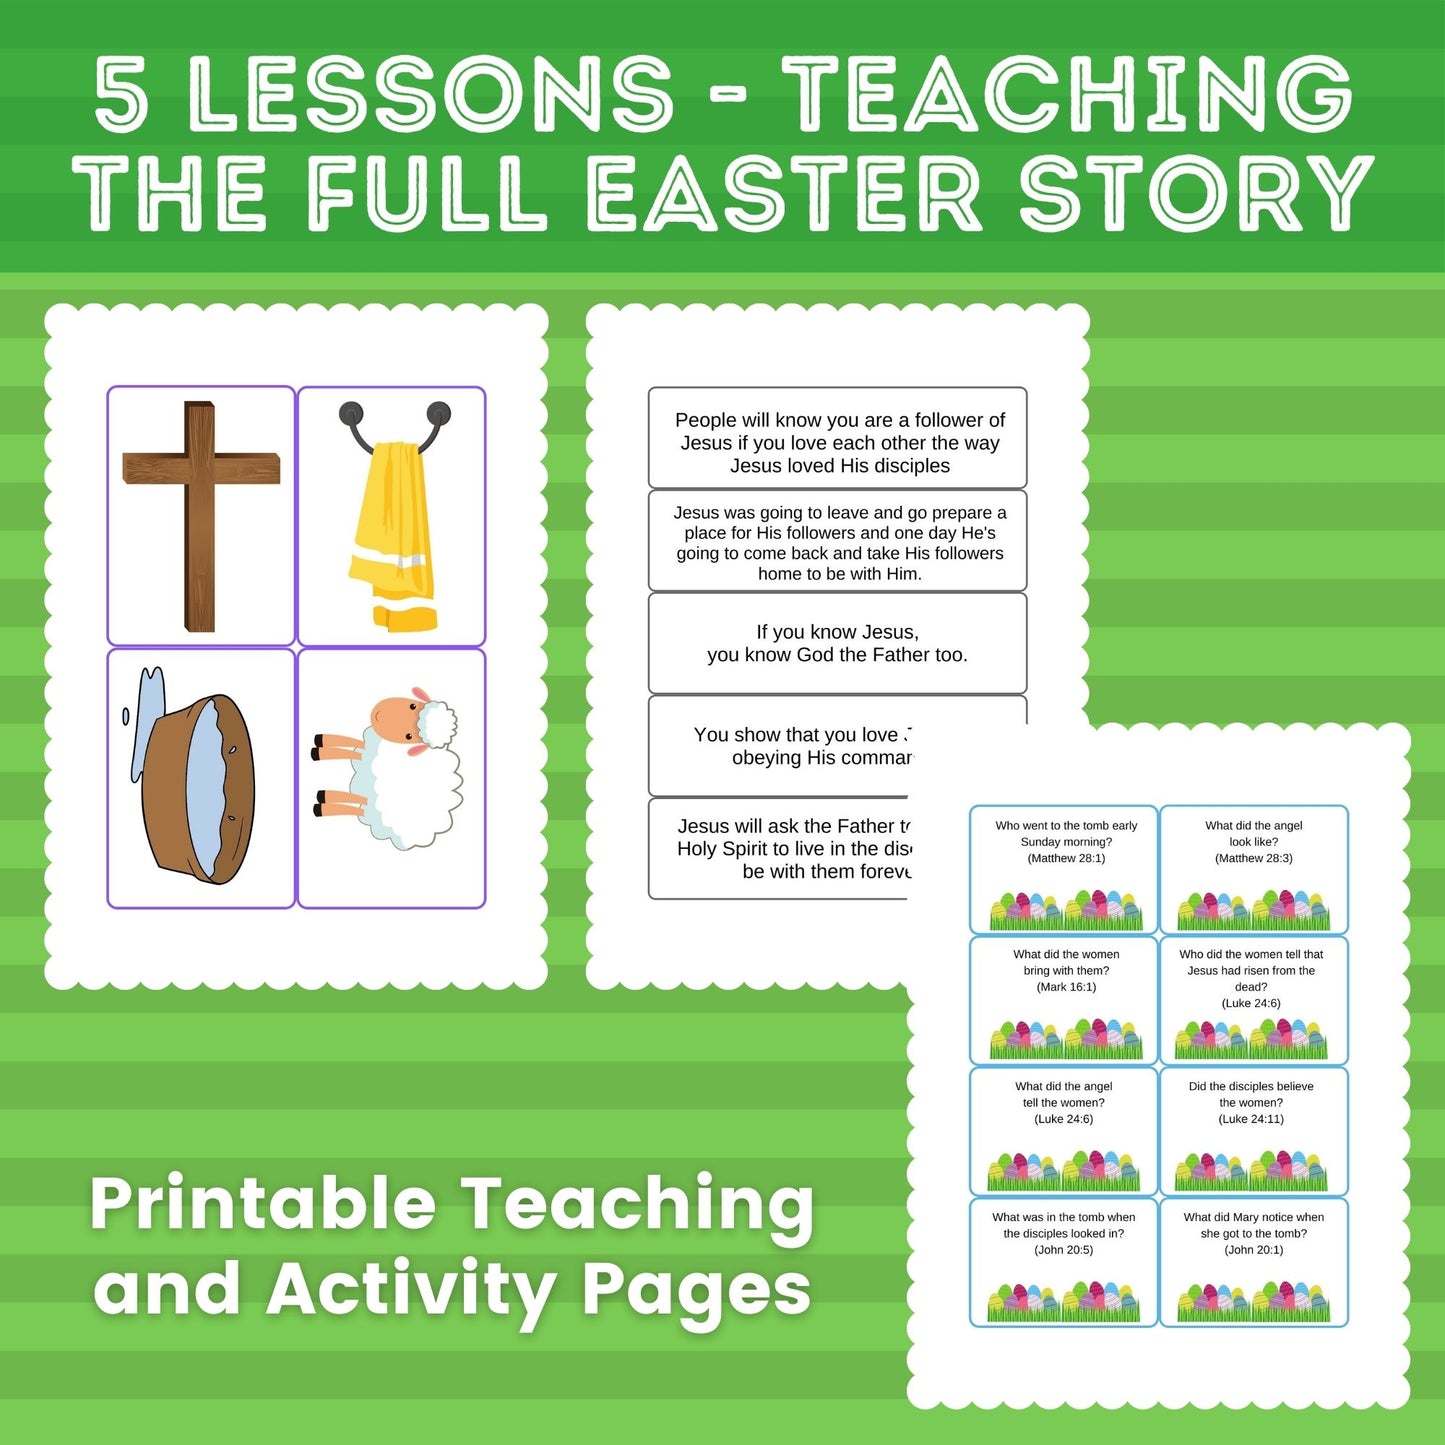 Why Easter? - 5-Week Bible Curriculum for Easter for ages 5-12